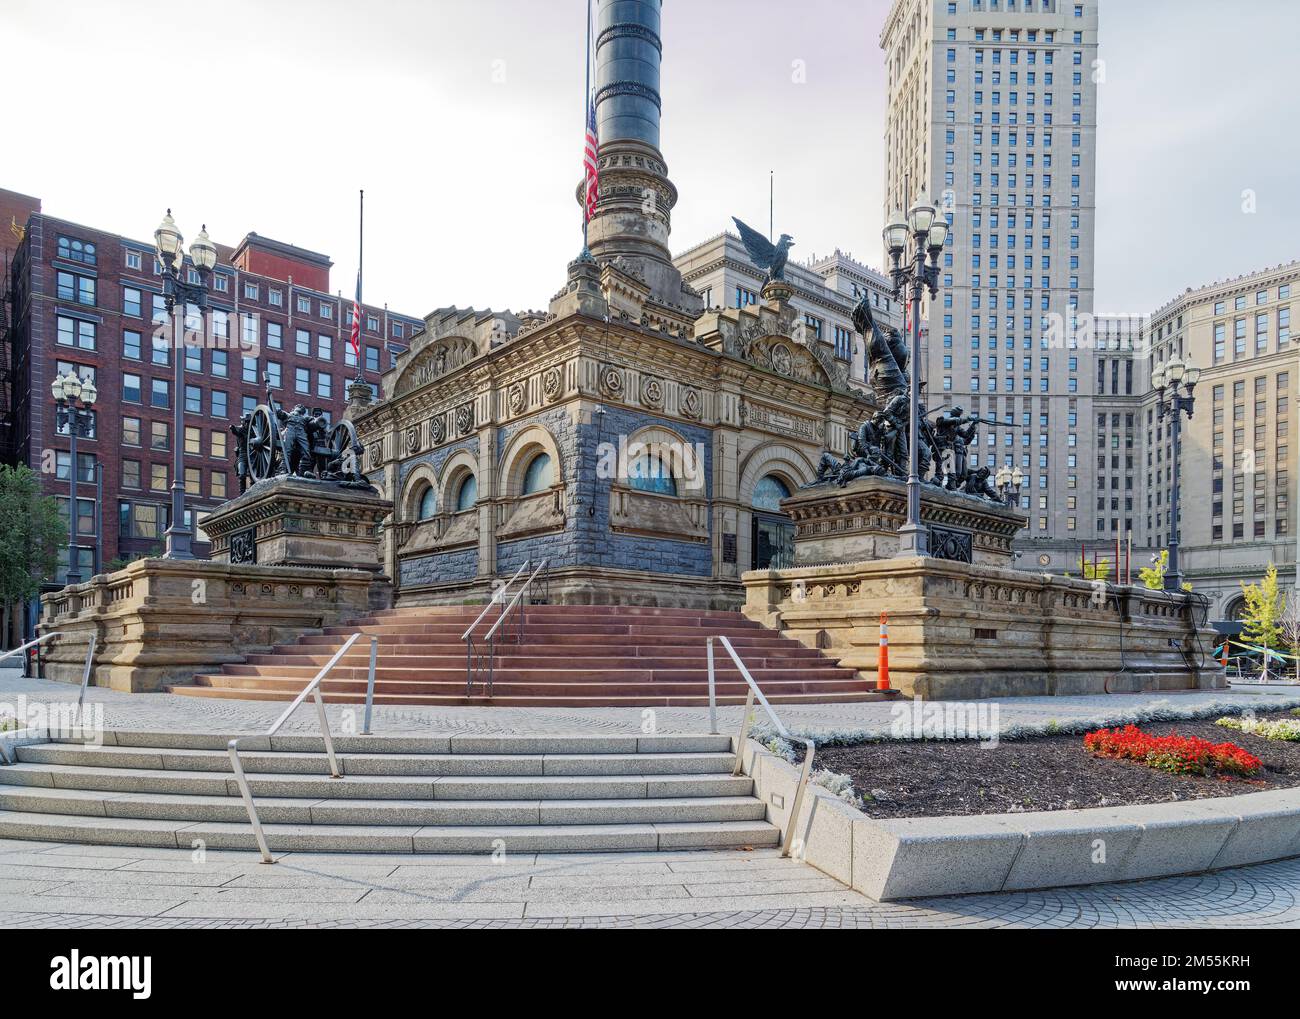 Cleveland’s Soldiers & Sailors Monument, designed and sculpted by Levi Scofield, a veteran of the 103rd Ohio Volunteer Infantry Regiment. Stock Photo